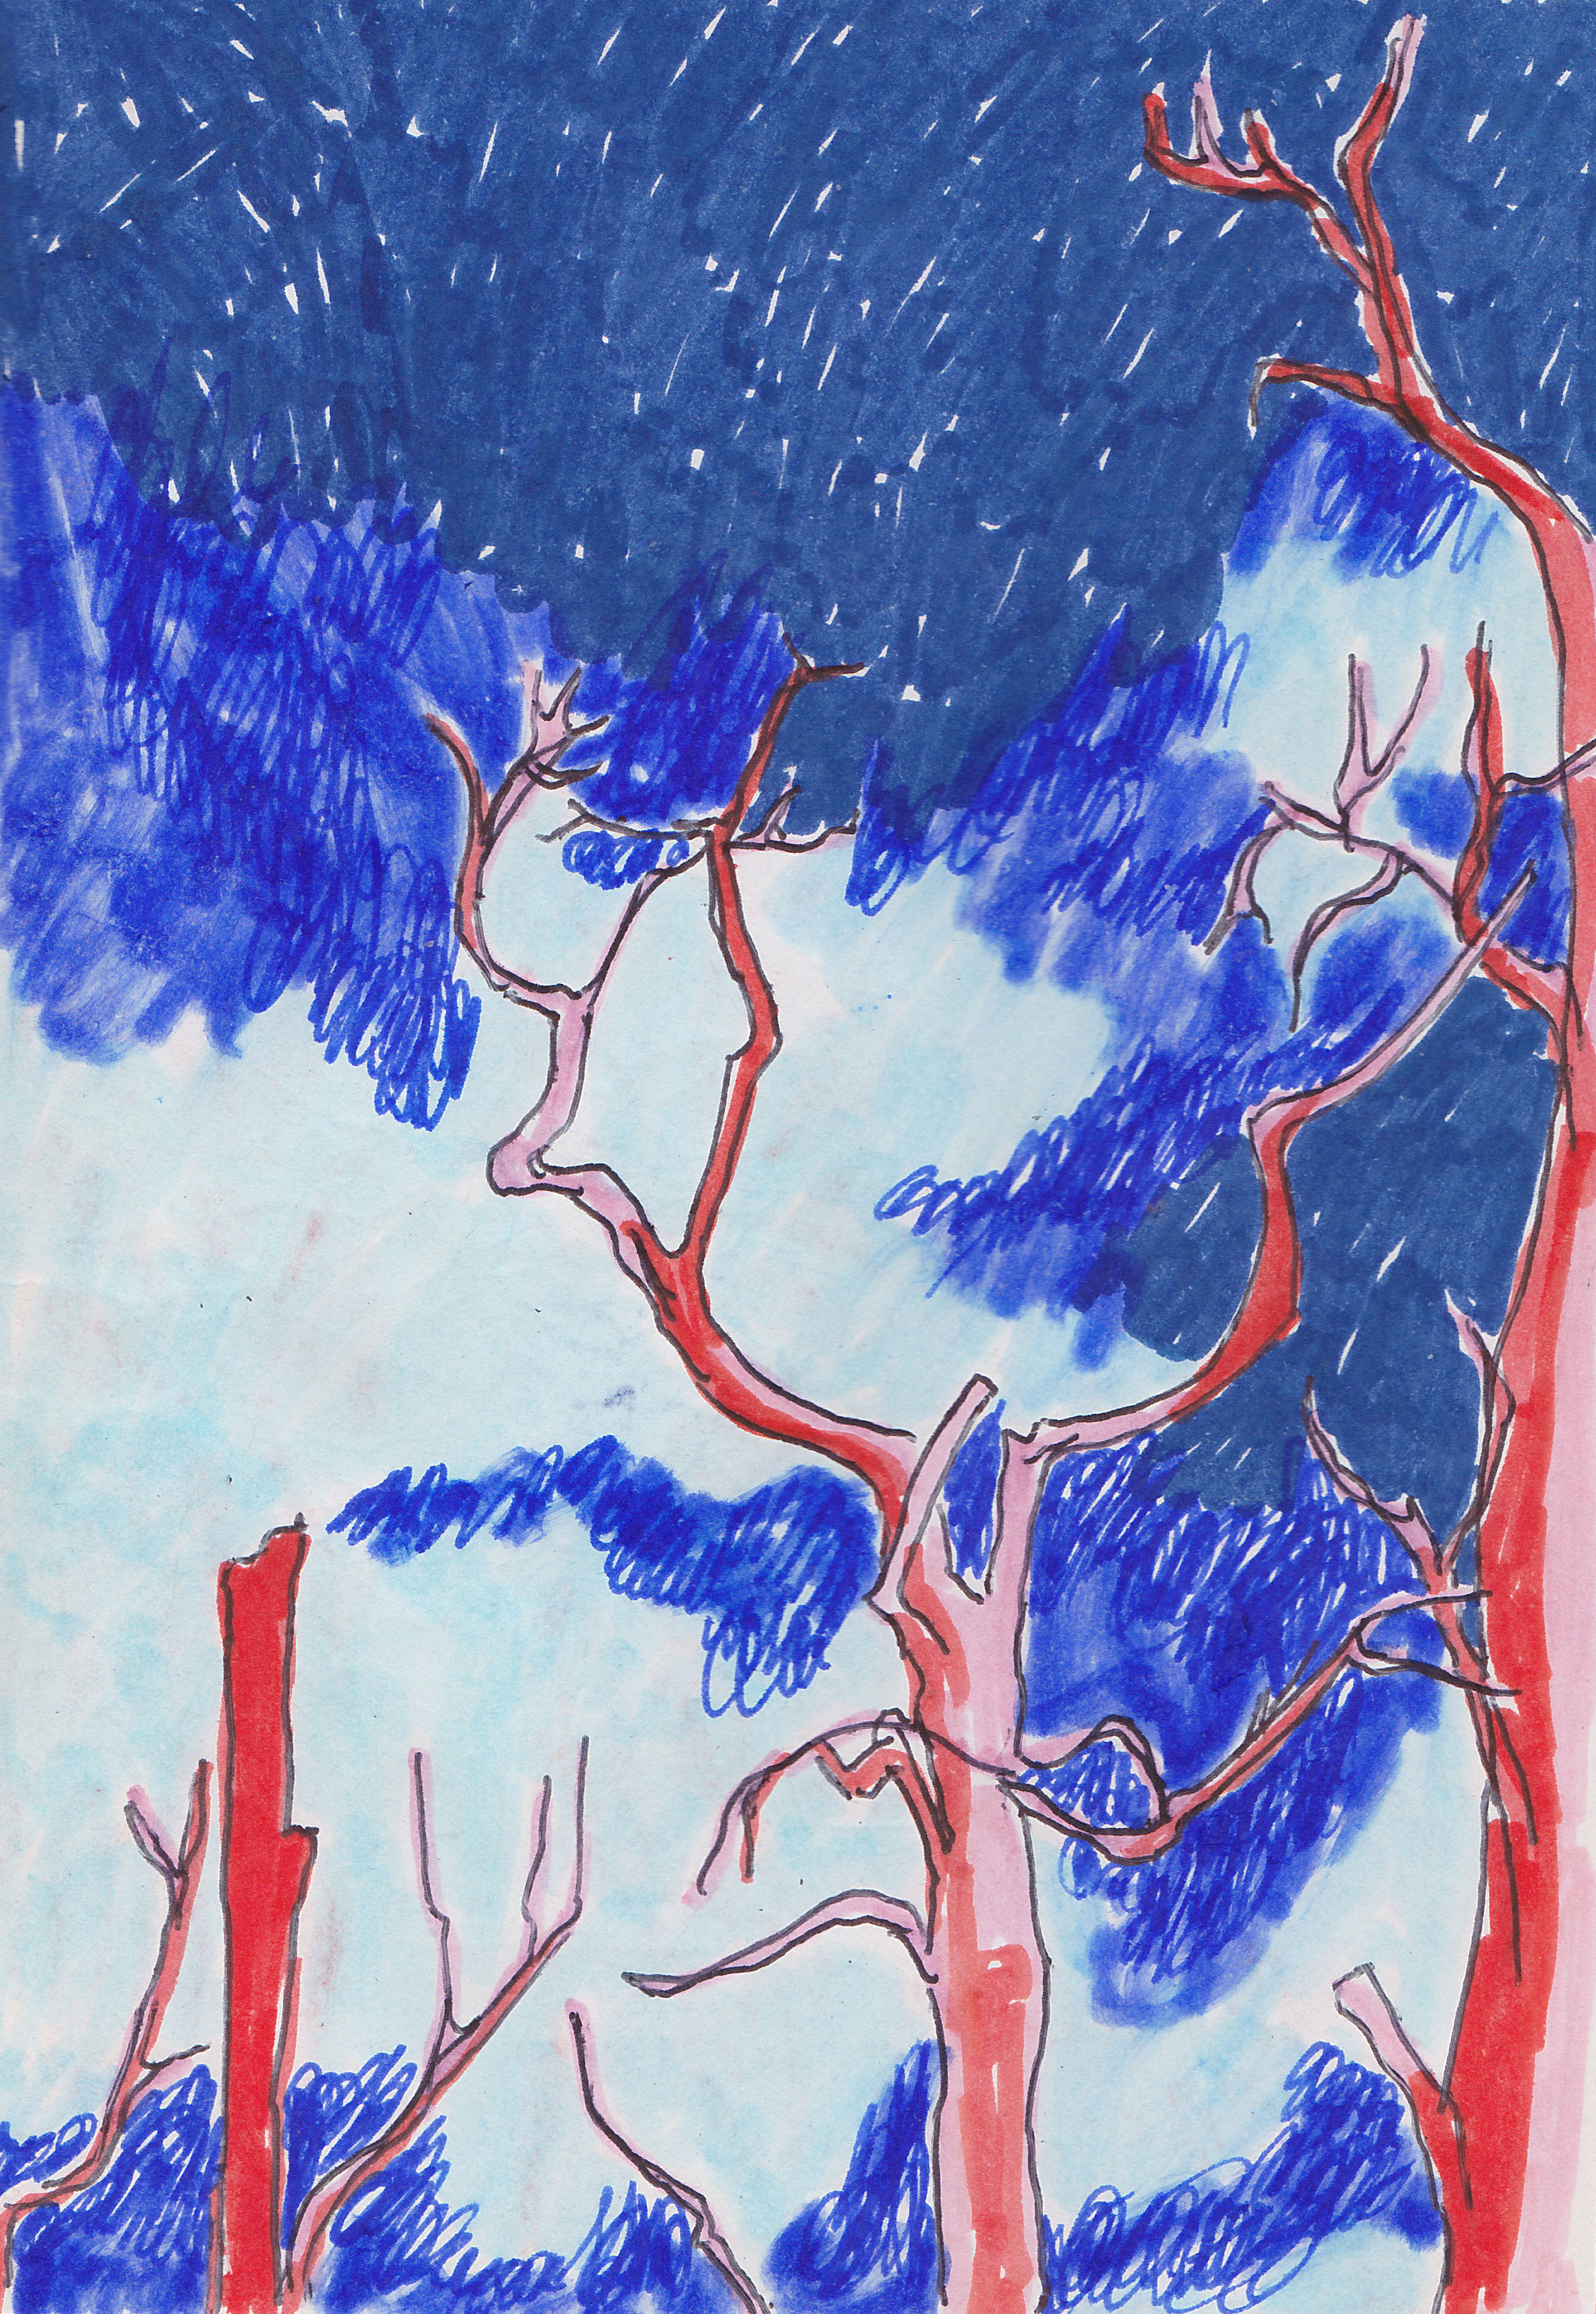 stormy dark blue sky with leavless red trees